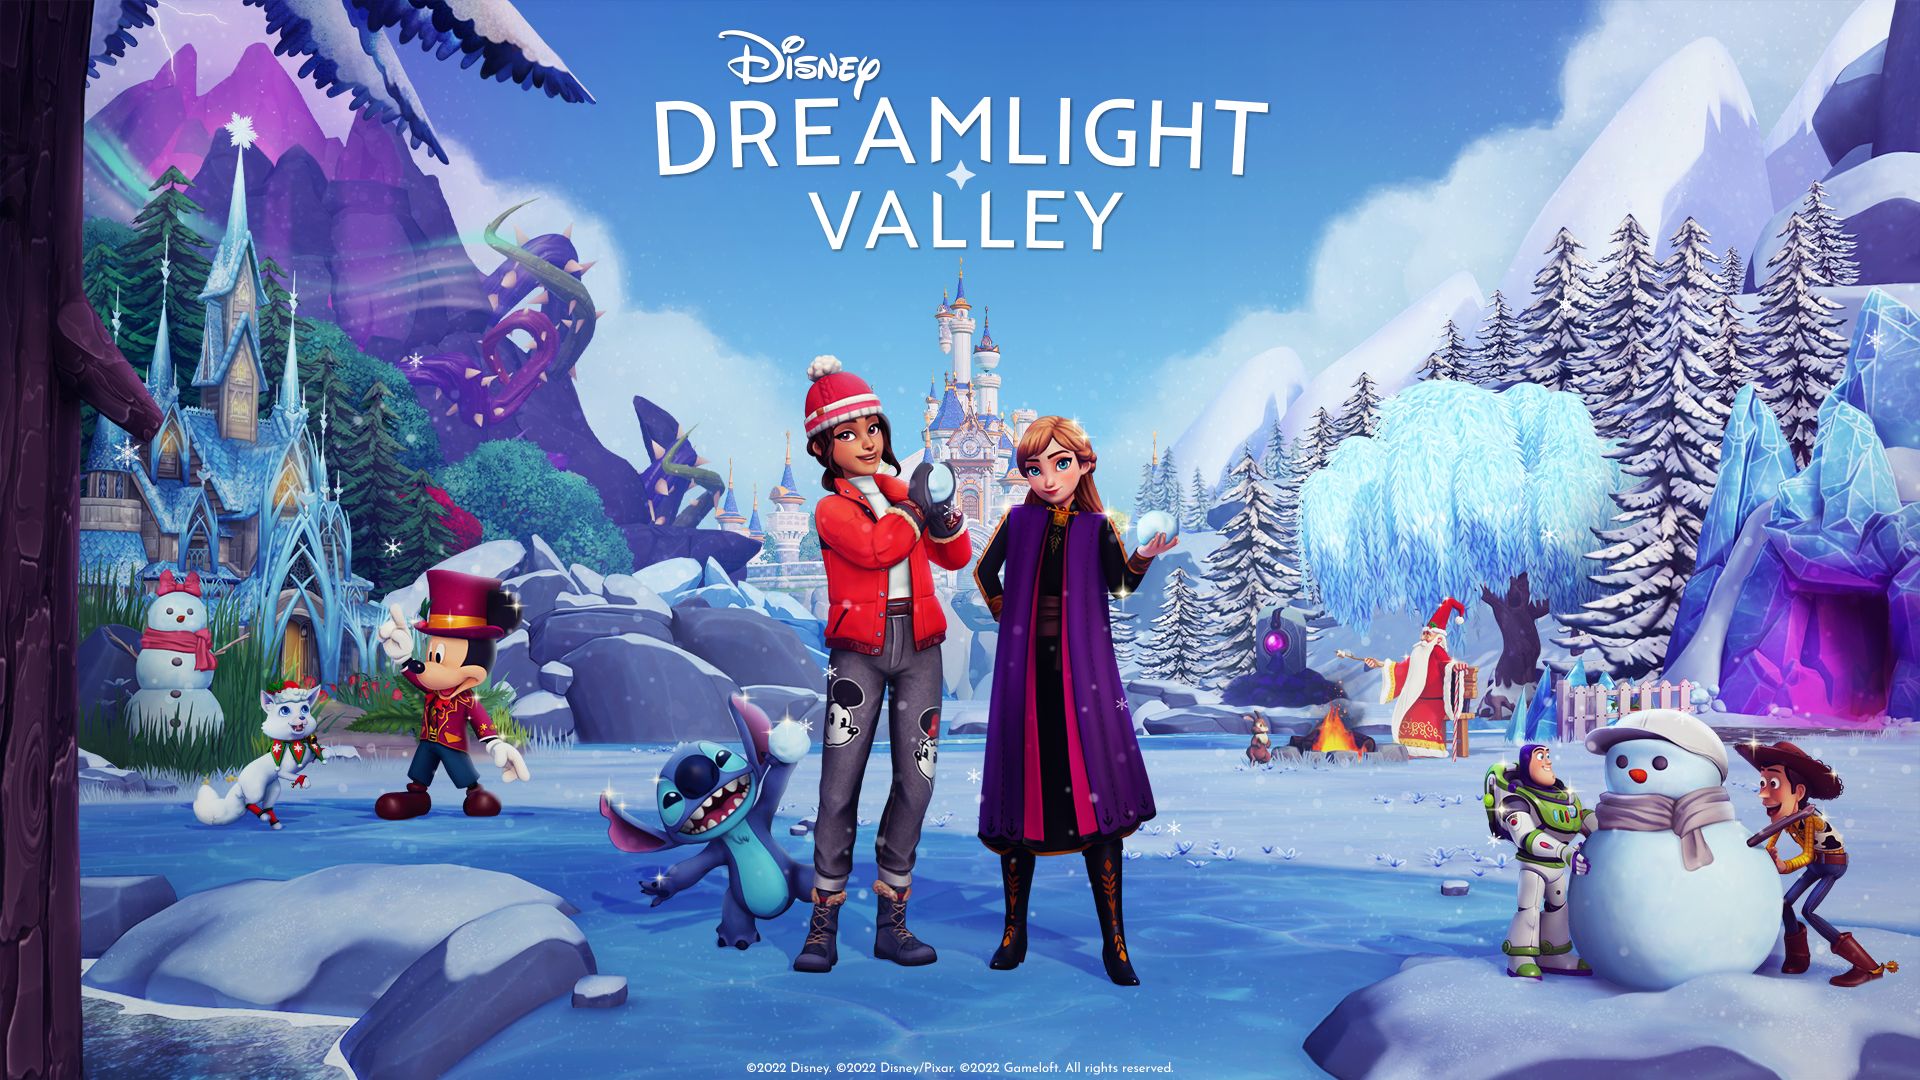 Disney Dreamlight Valley Goes from the Toy Box to the Stars in Latest